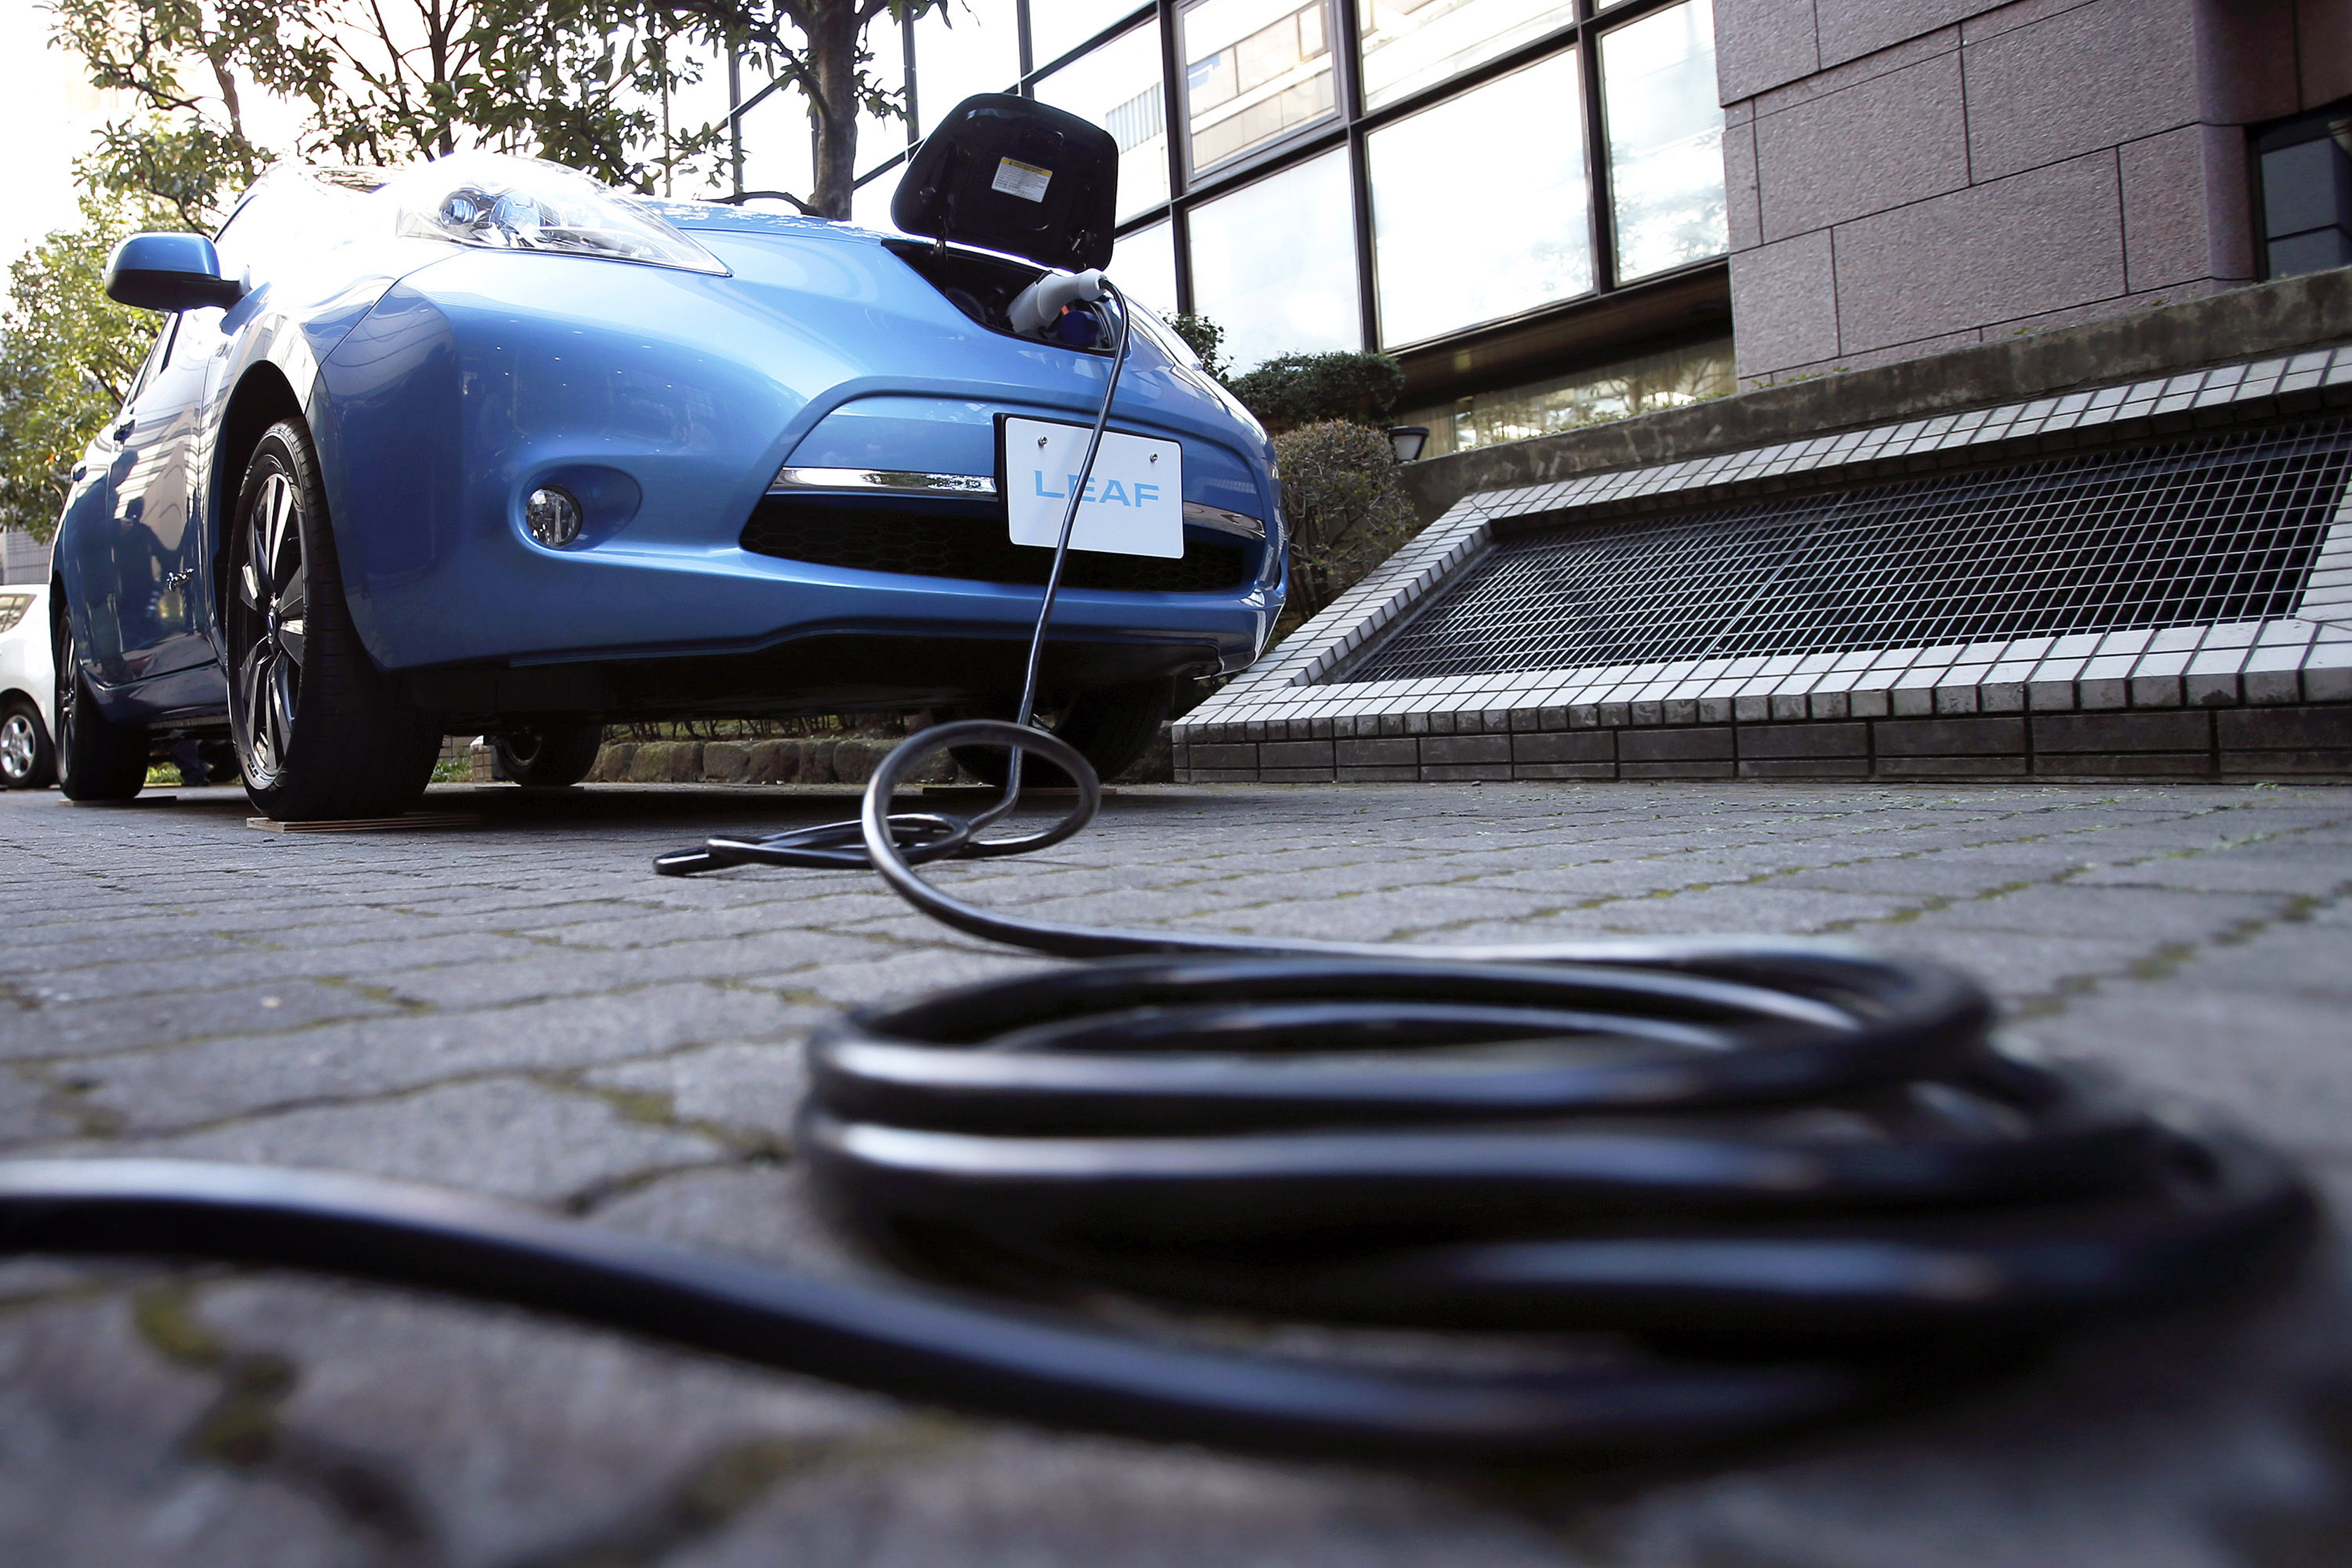 An electric charging cable is seen connected to the updated Nissan Leaf vehicle during a news conference in Japan, Tokyo, on Tuesday, Nov. 20, 2012. (Kiyoshi Ota—Bloomberg/Getty Images)